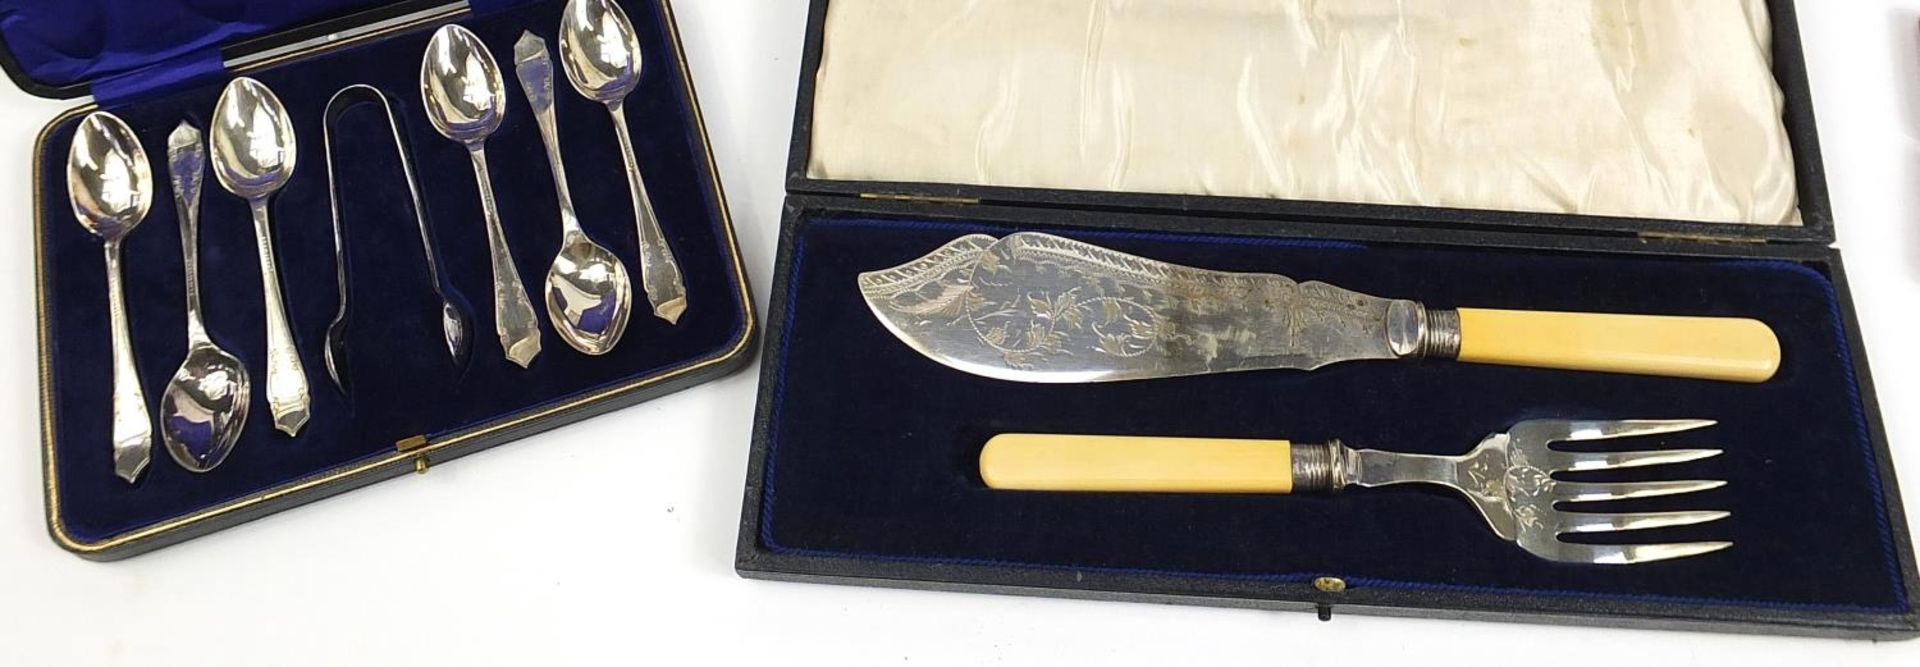 Silver plated cutlery housed in fitted cases including set of six fish knives and forks with ivorine - Image 4 of 6